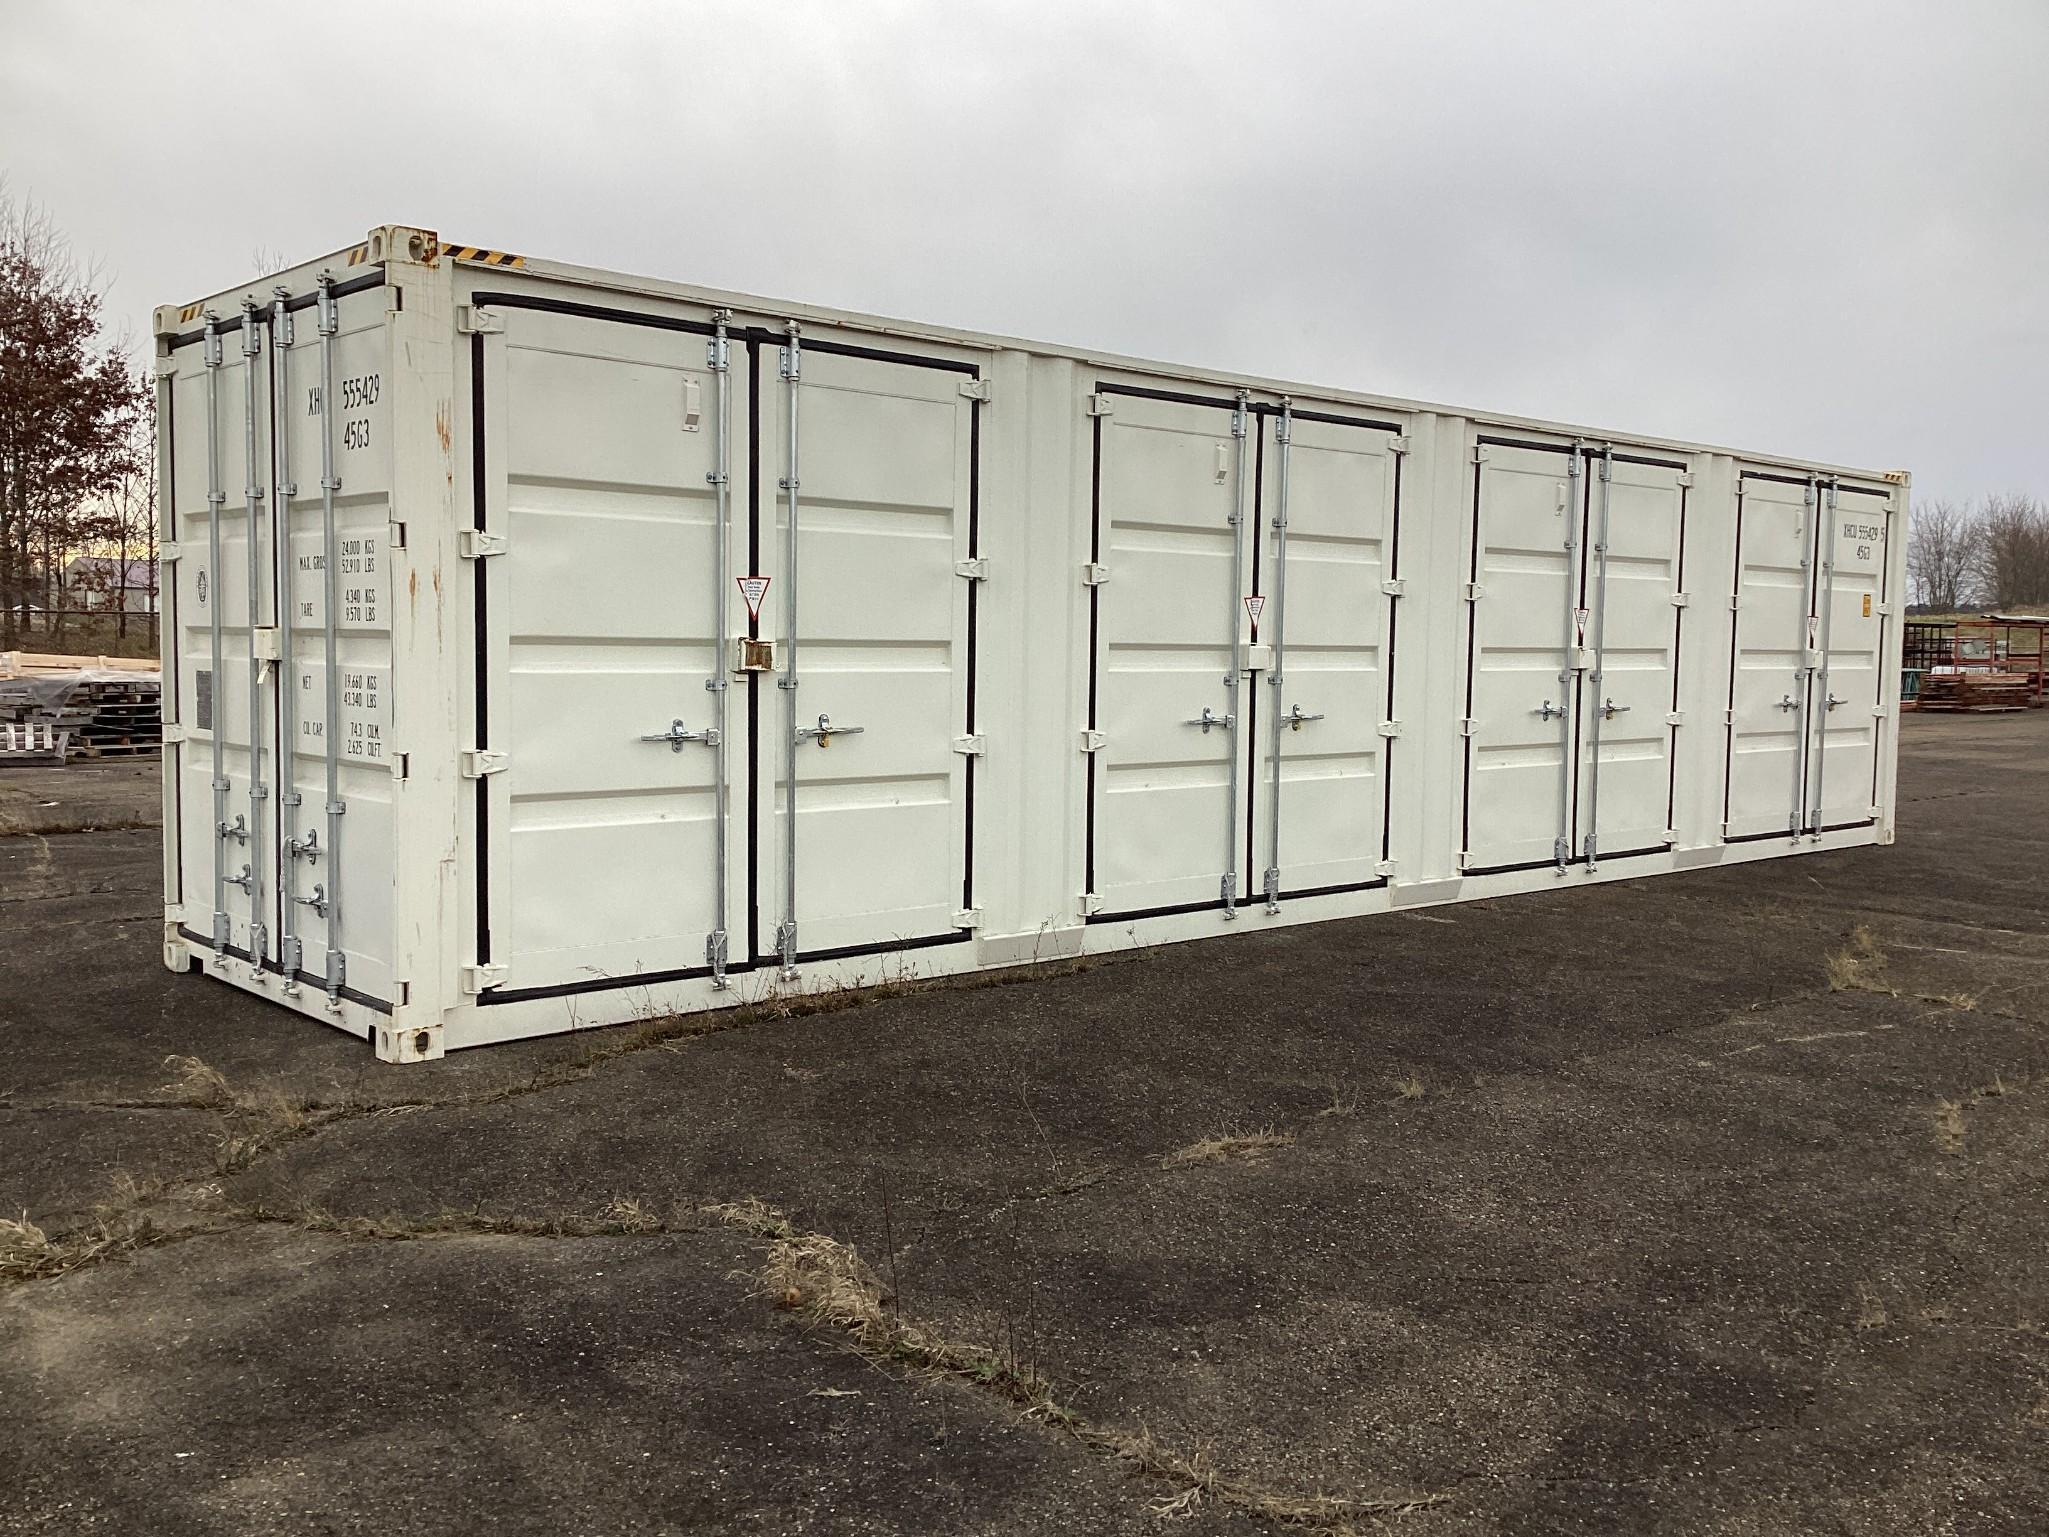 New 1 Trip 40 ft. High Cube Multi Door Shipping Container